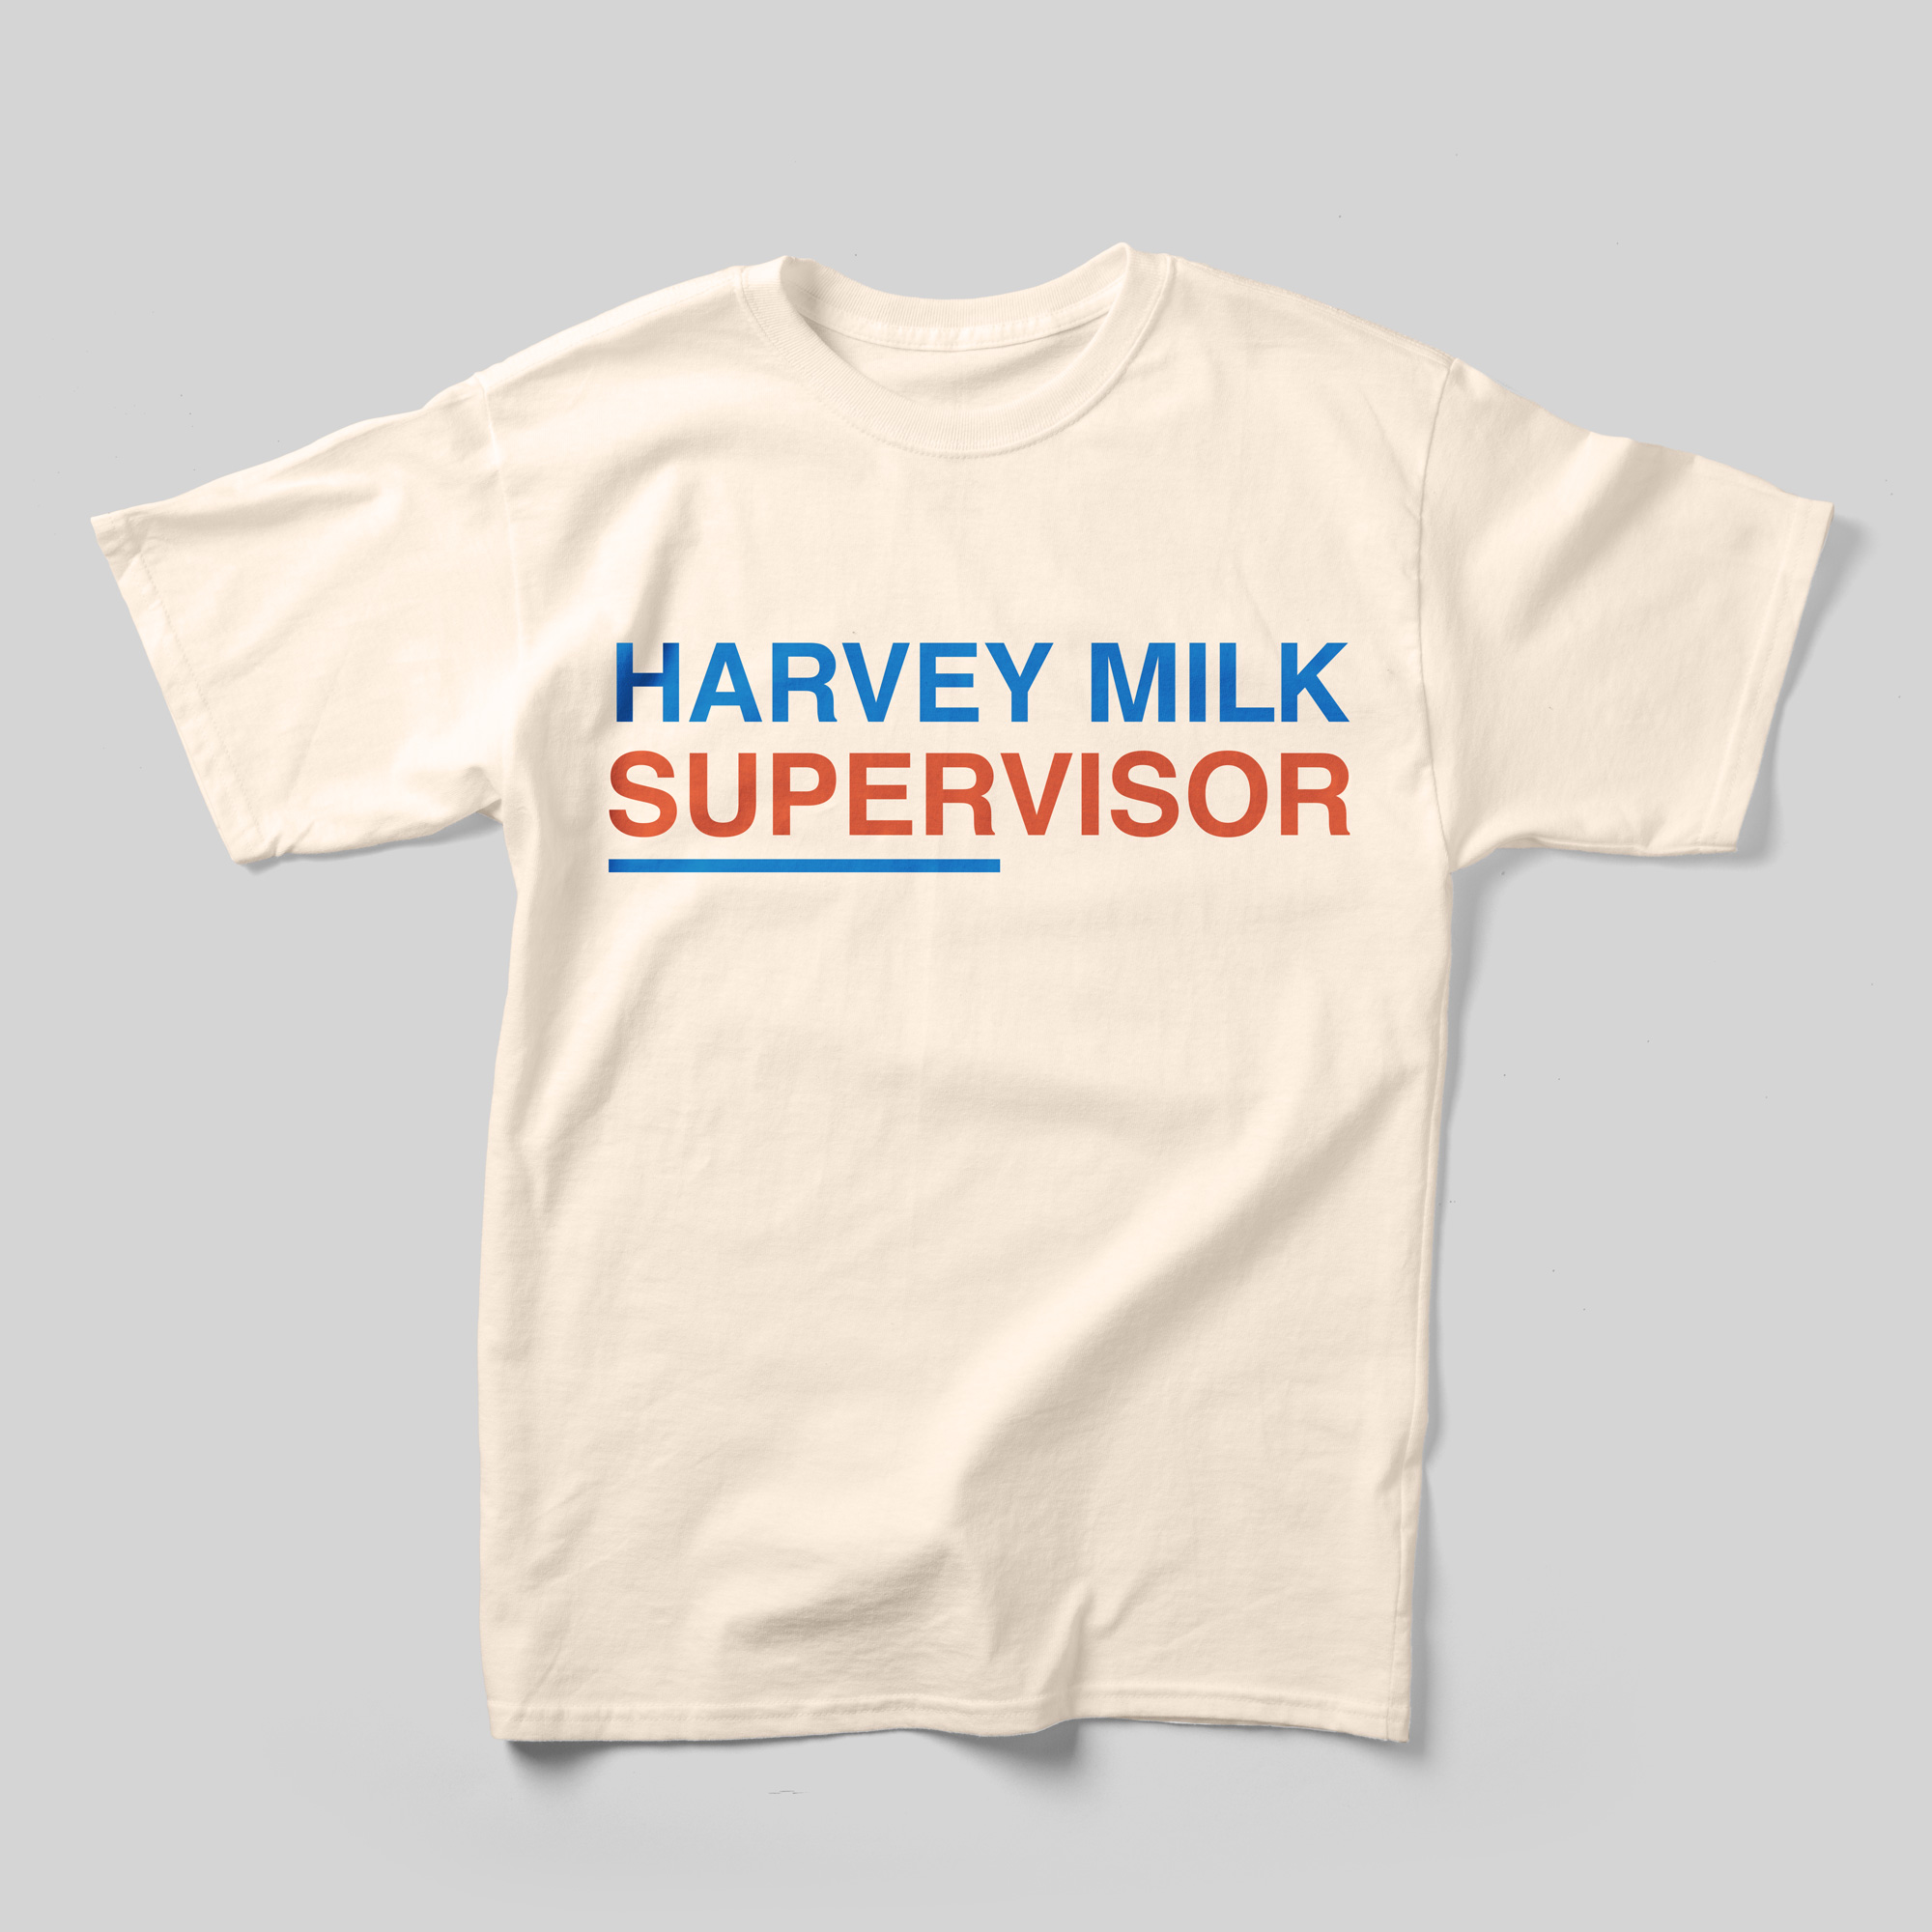 A beige t-shirt that reads "Harvey Milk Supervisor" in blue and red.